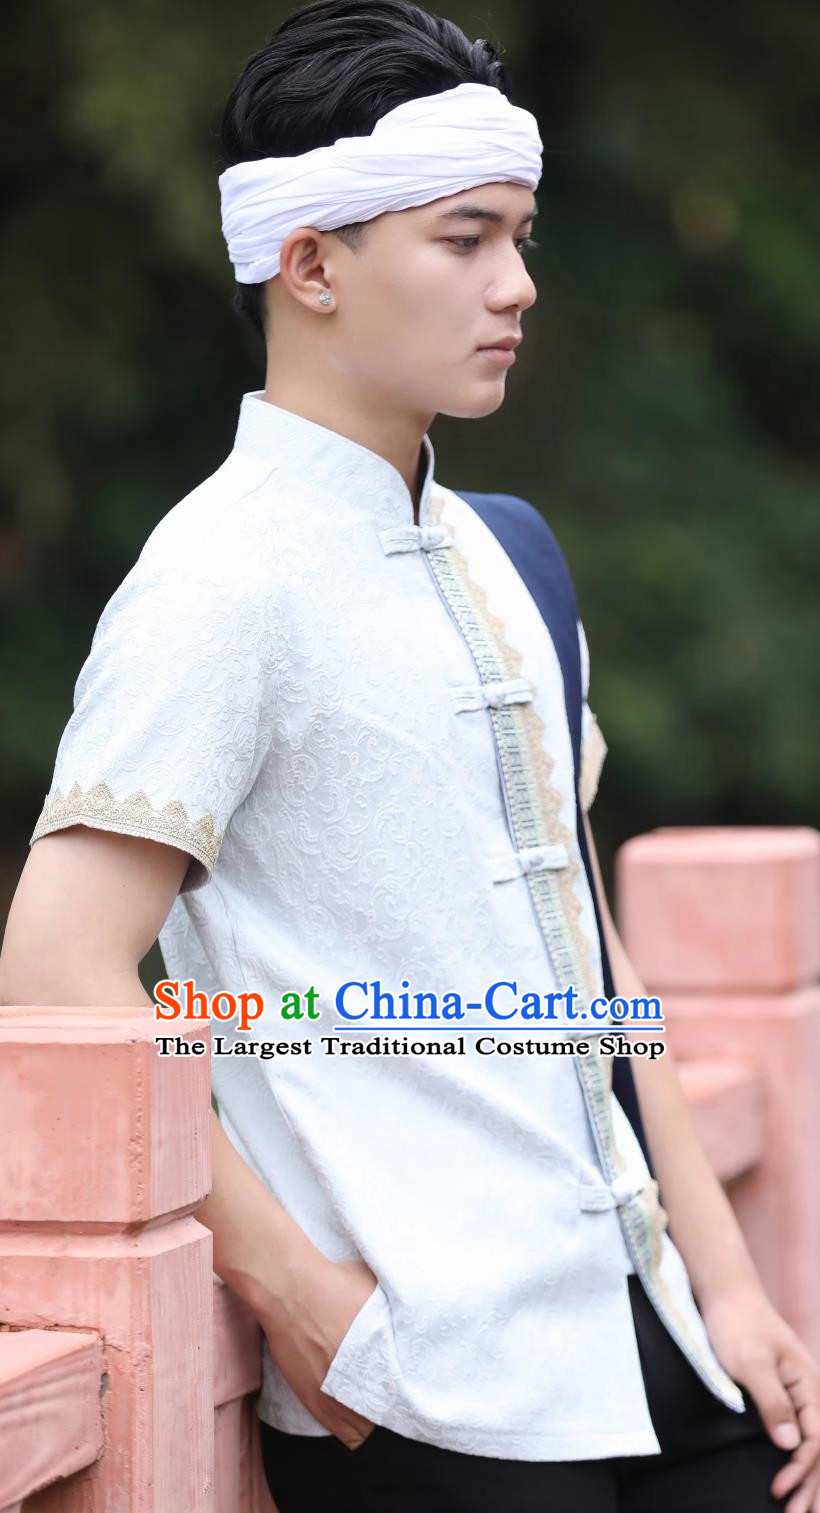 Dai Traditional Men Top Spring And Summer Short Sleeved Daily White Shirt